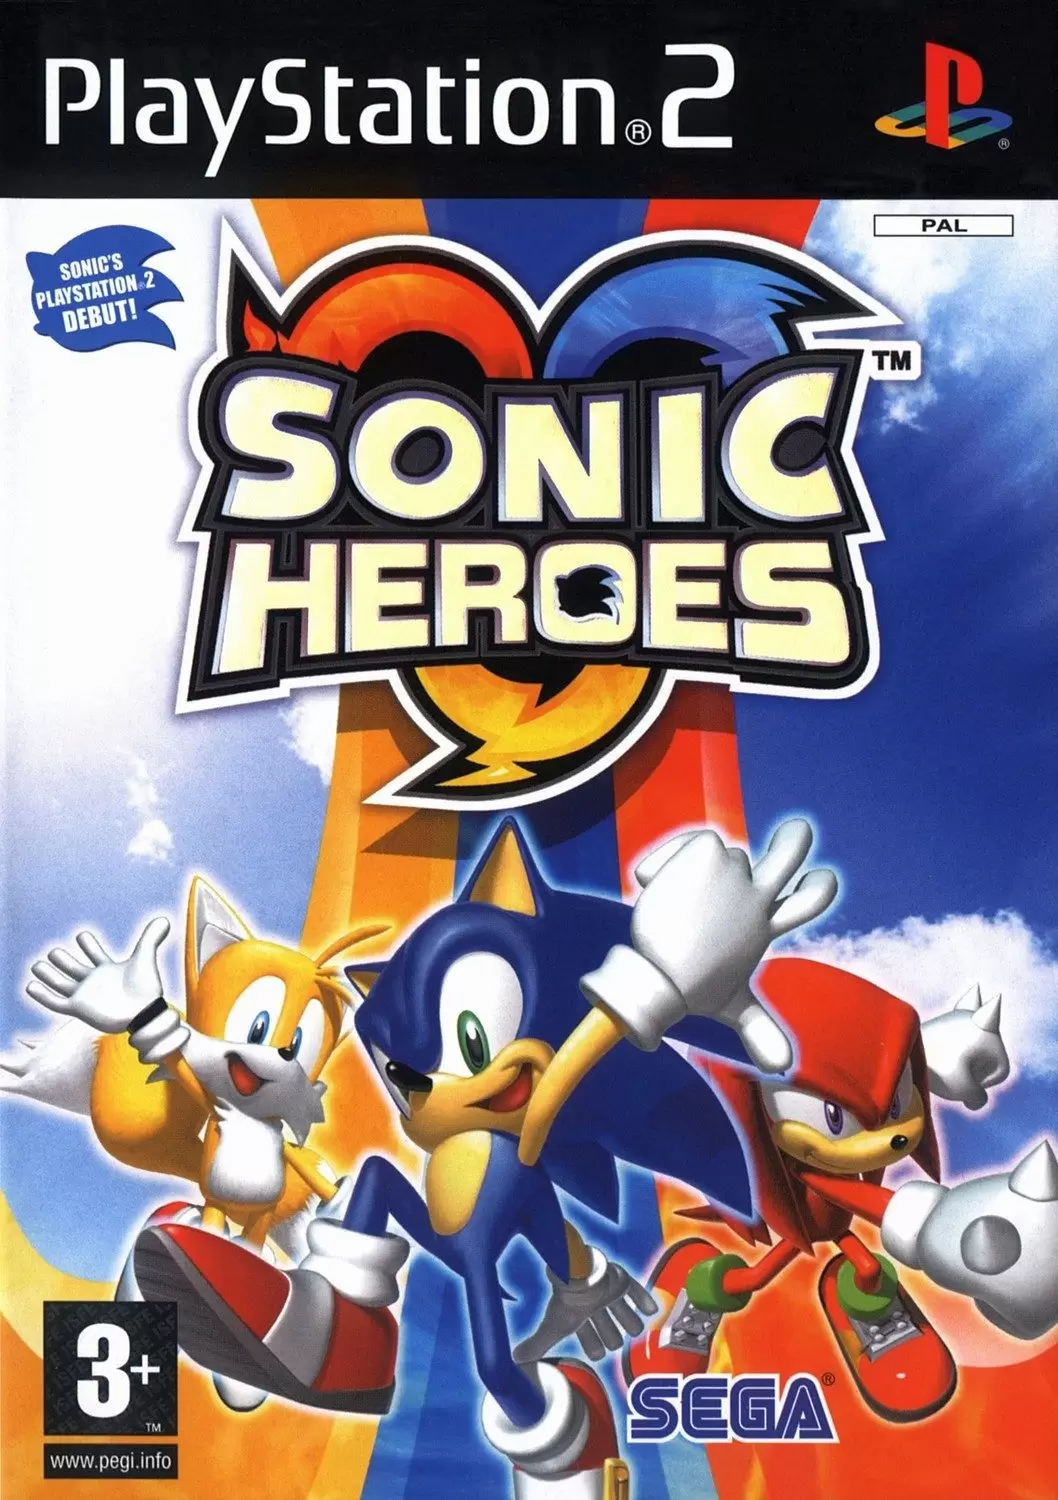 PS2 Games - Sonic Heroes